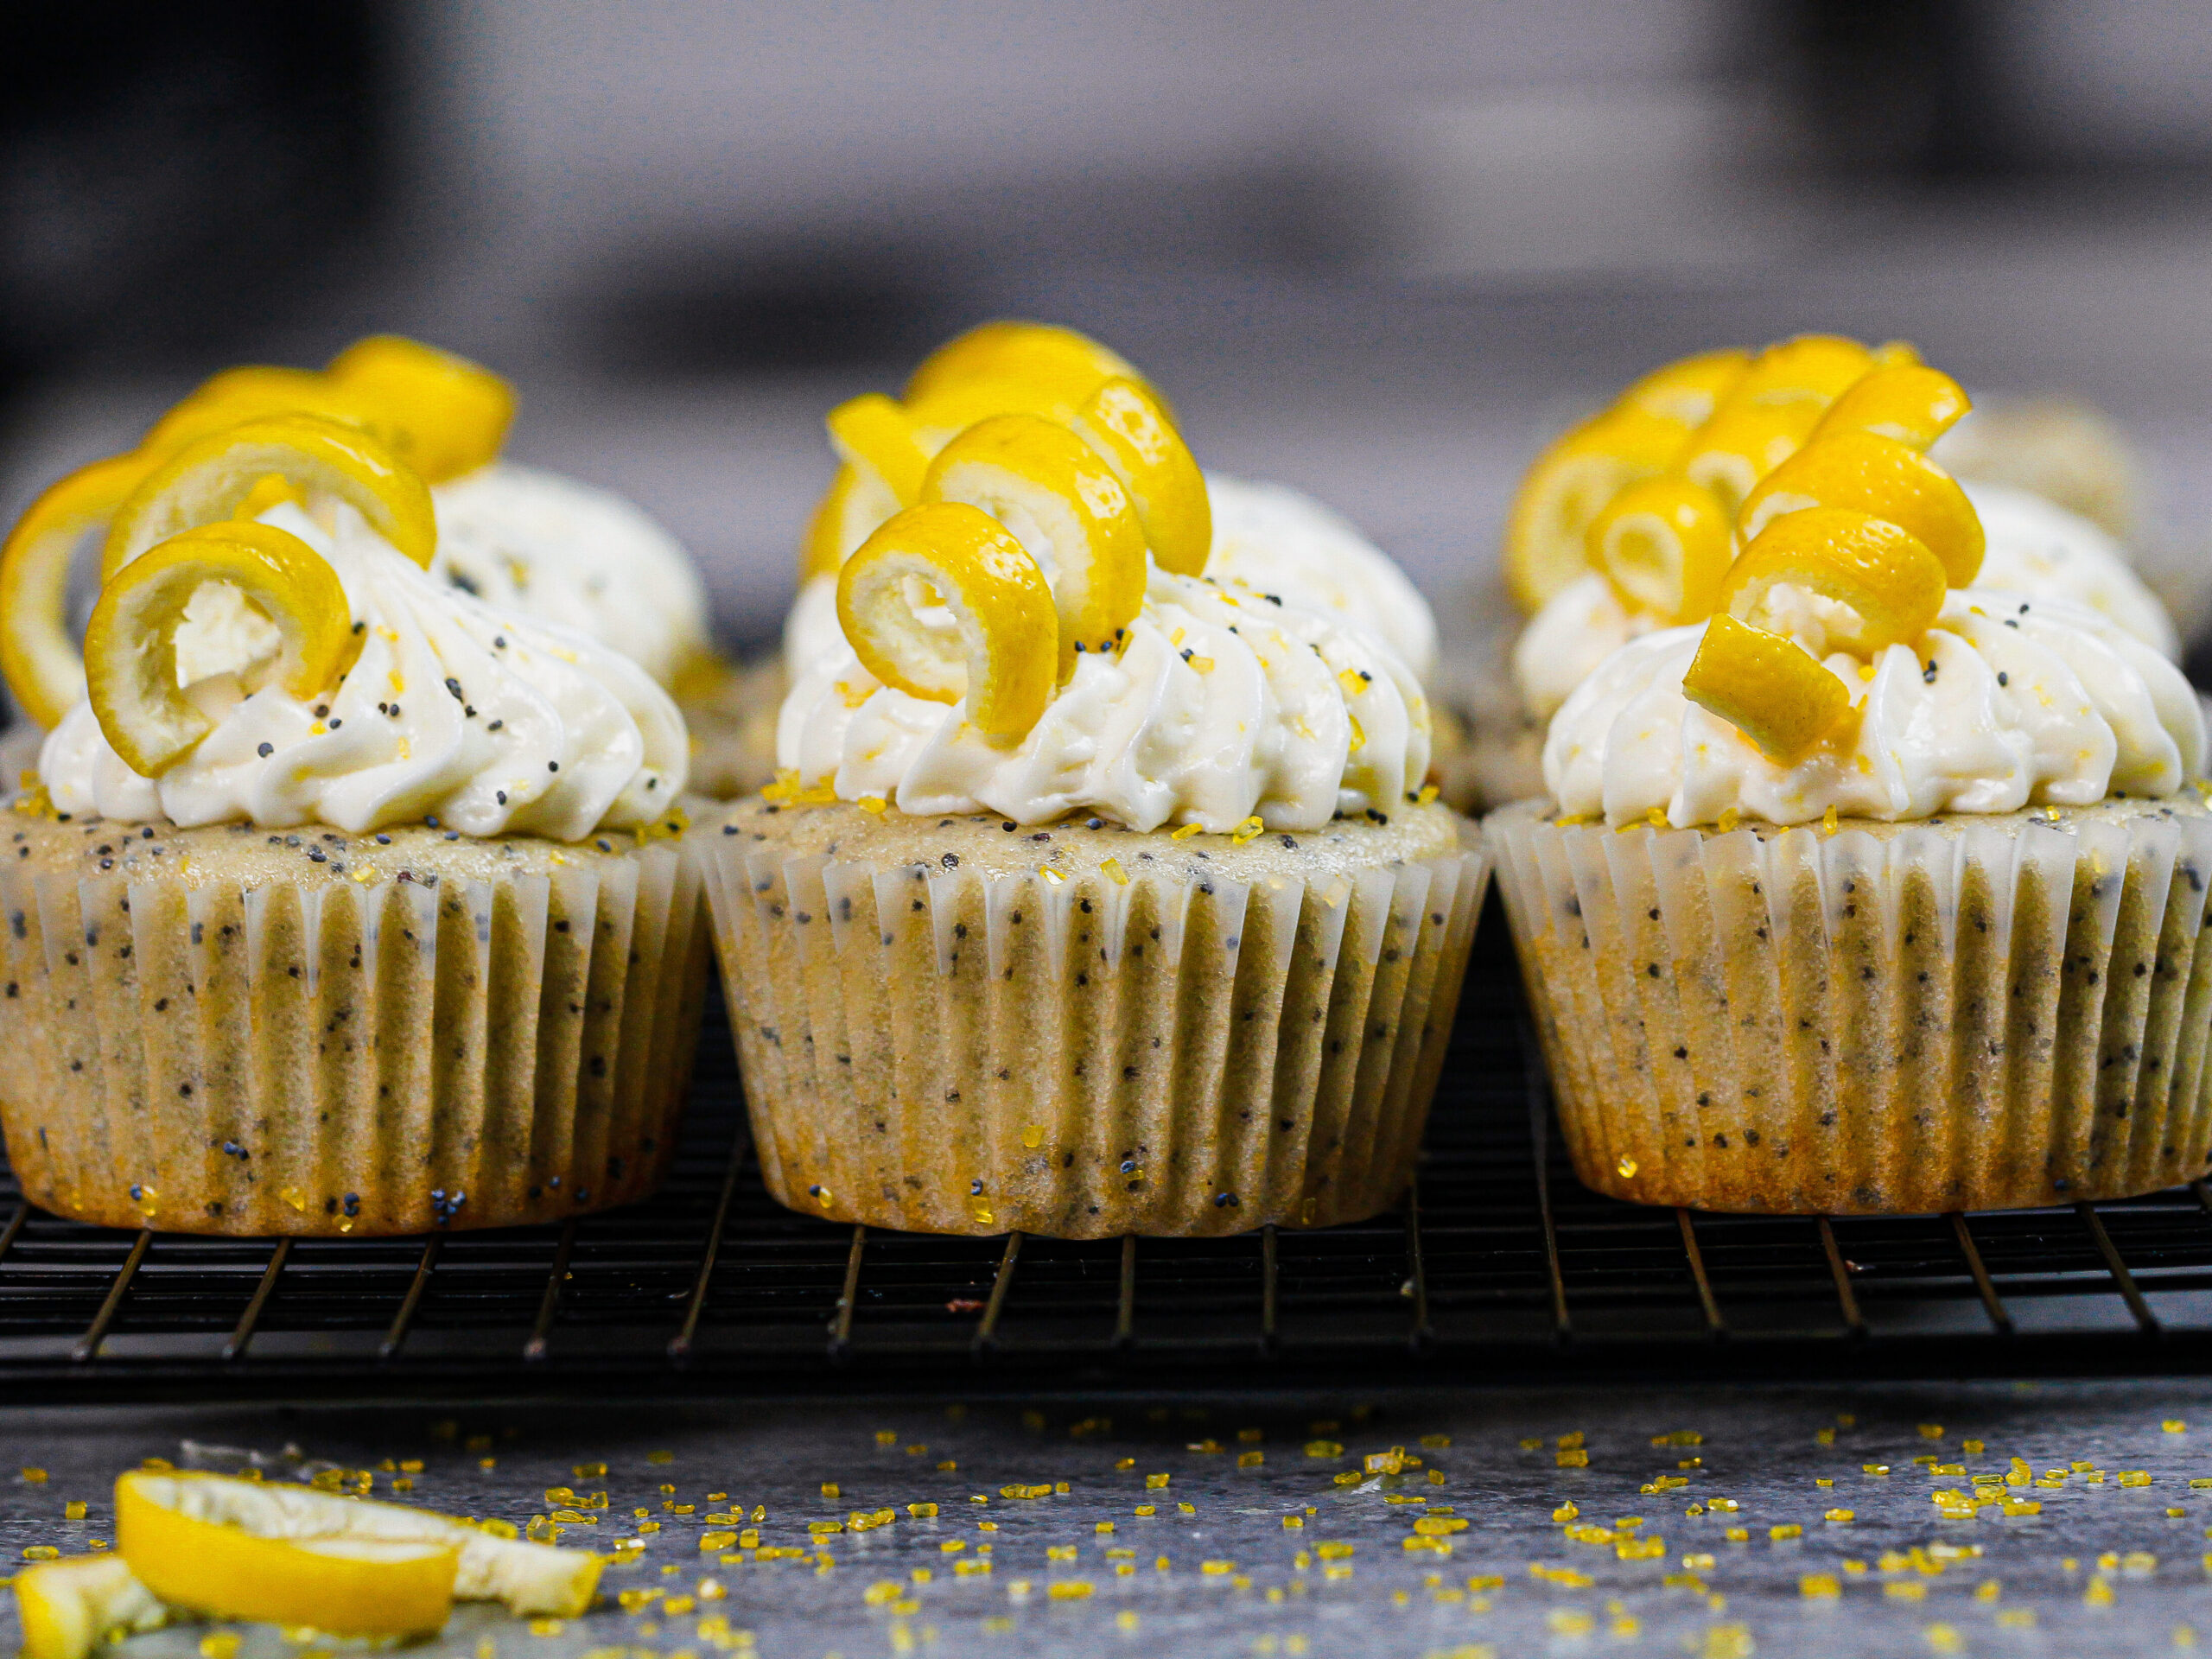 image of lemon poppy seed cupcakes decorated with lemon spirals
